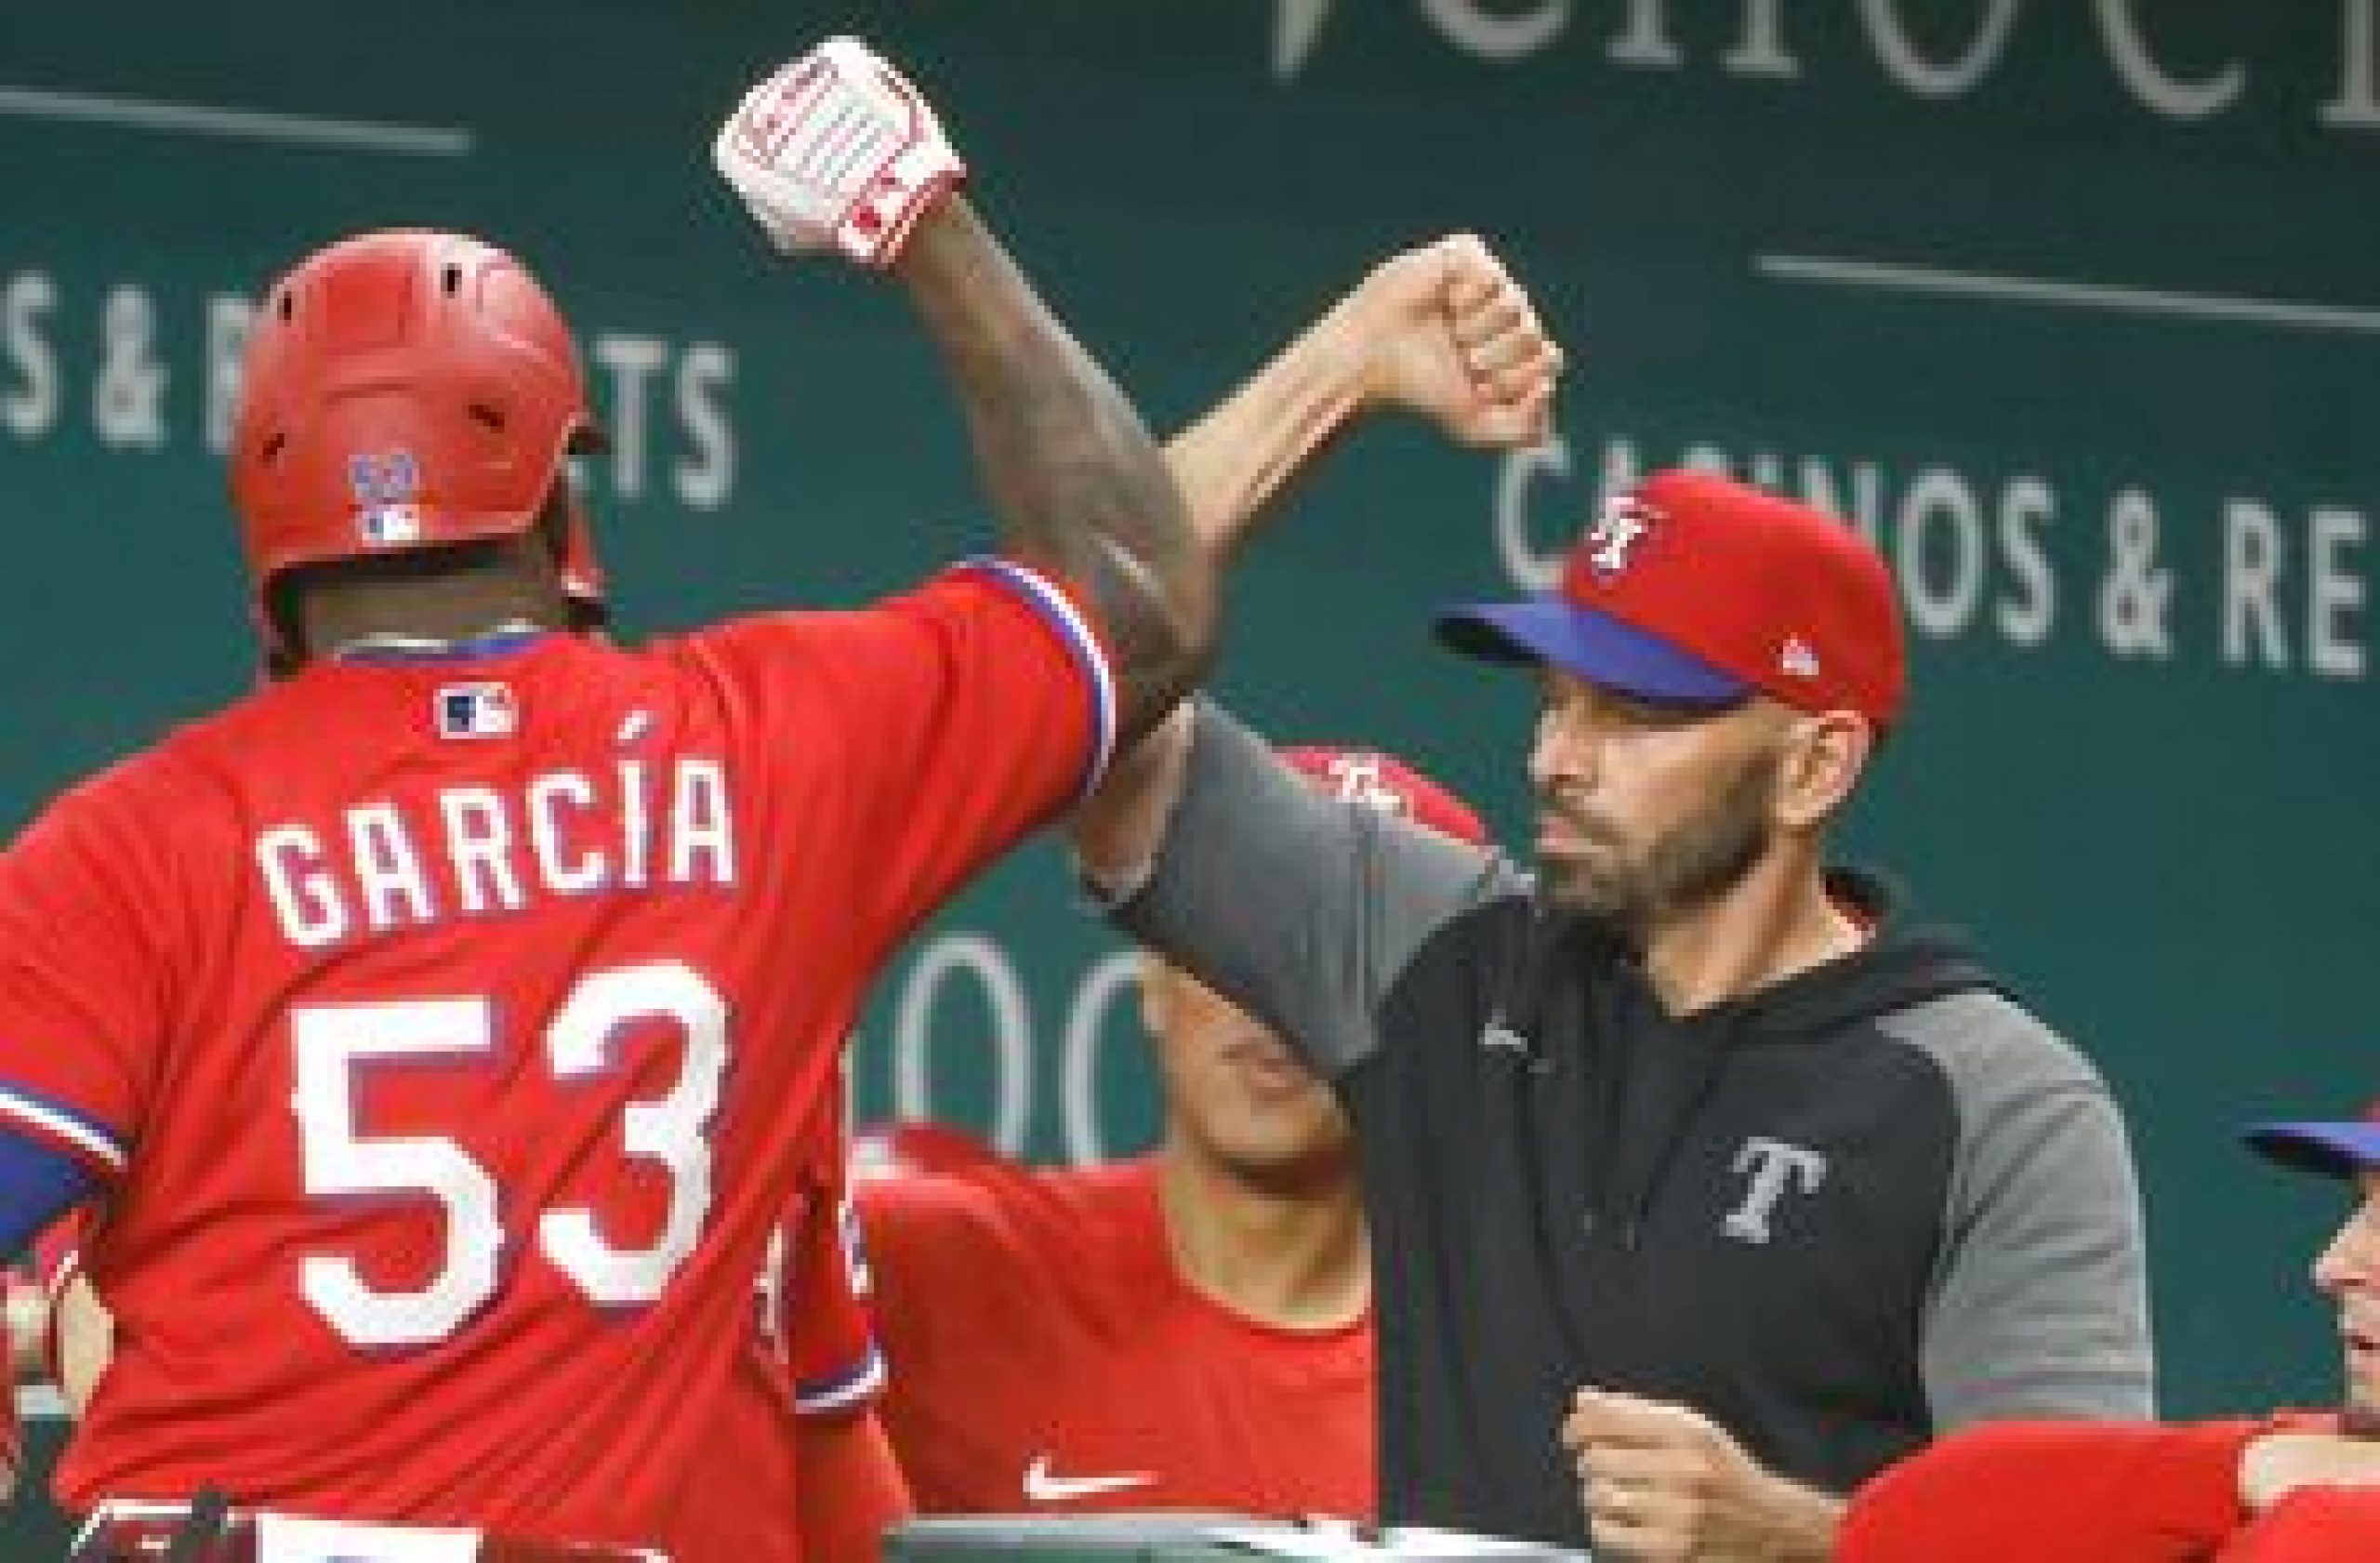 Adolis Garcia homers in 10th to give Rangers walk-off win over Astros, 7-5